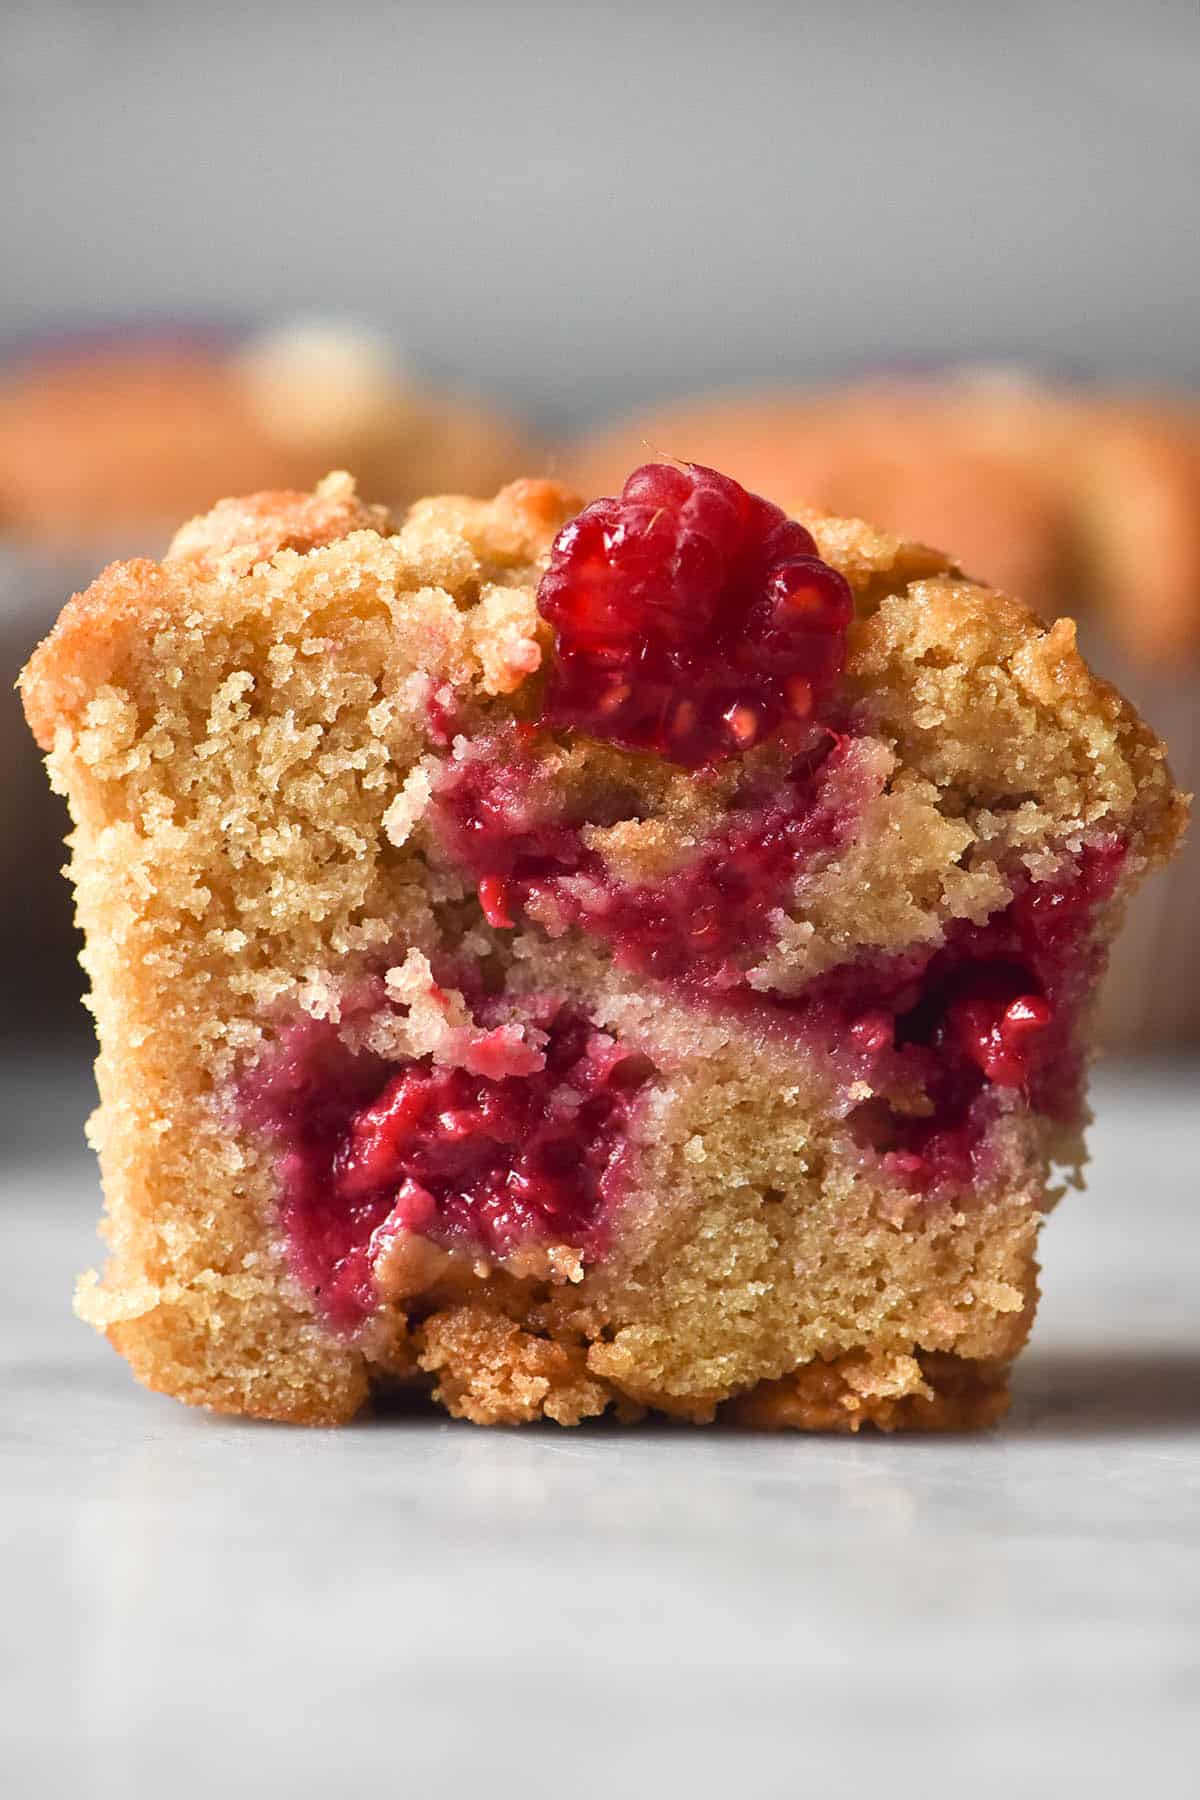 A side on macro image of a gluten free raspberry muffin sliced in half to reveal the raspberry stuffed crumb. The muffin sits on a white marble table with additional muffins in the background.